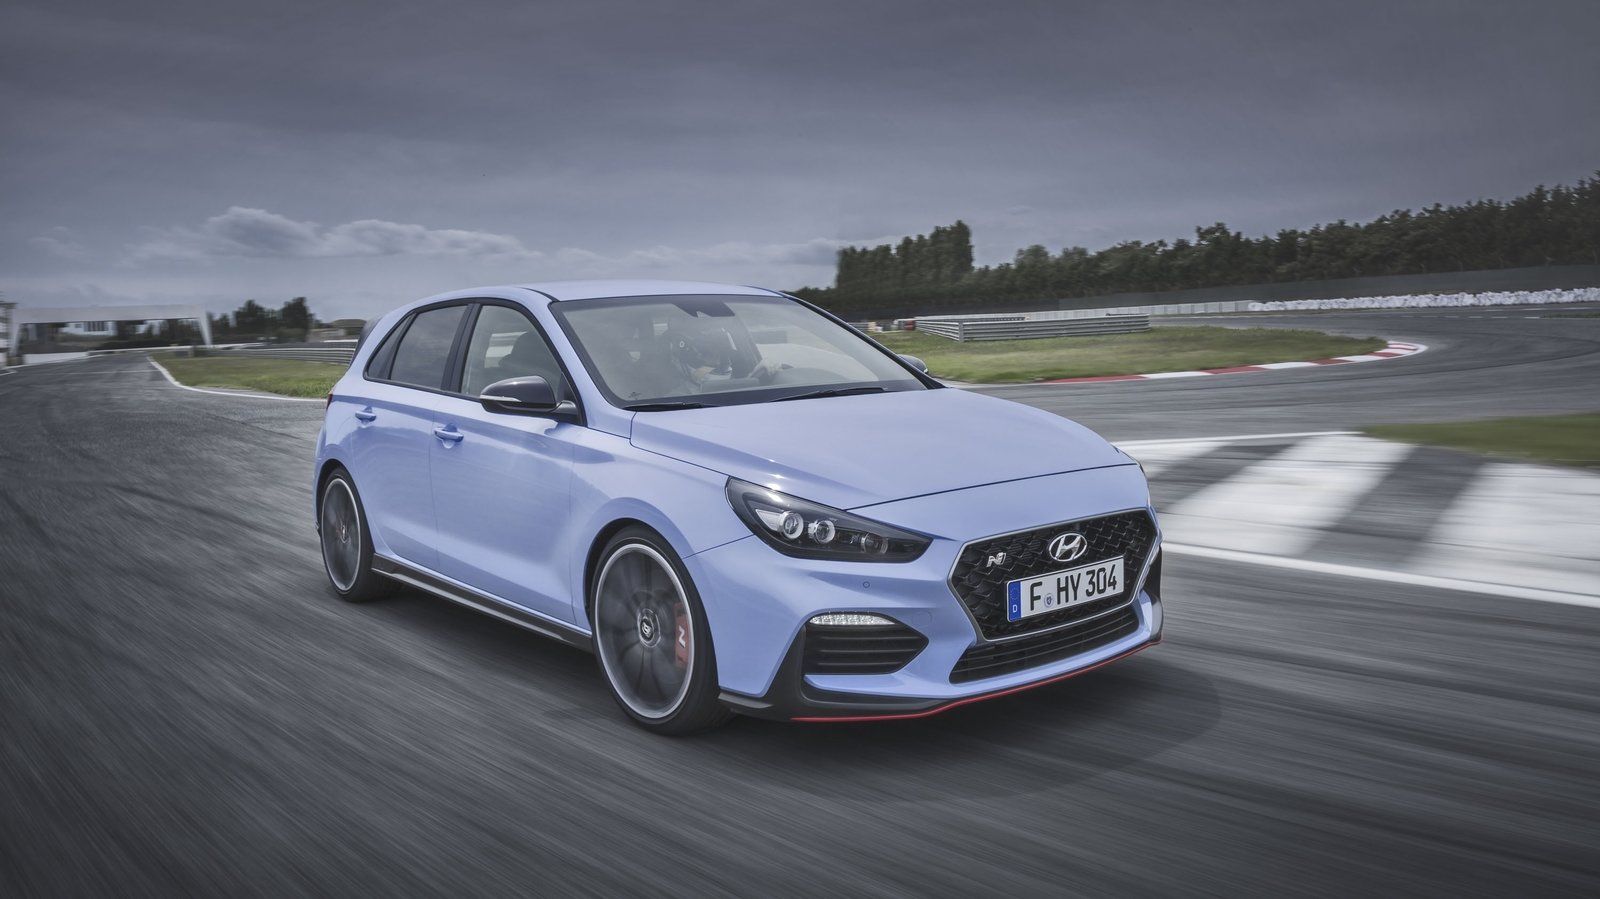 Hyundai I30 N Picture, Photo, Wallpaper And Videos